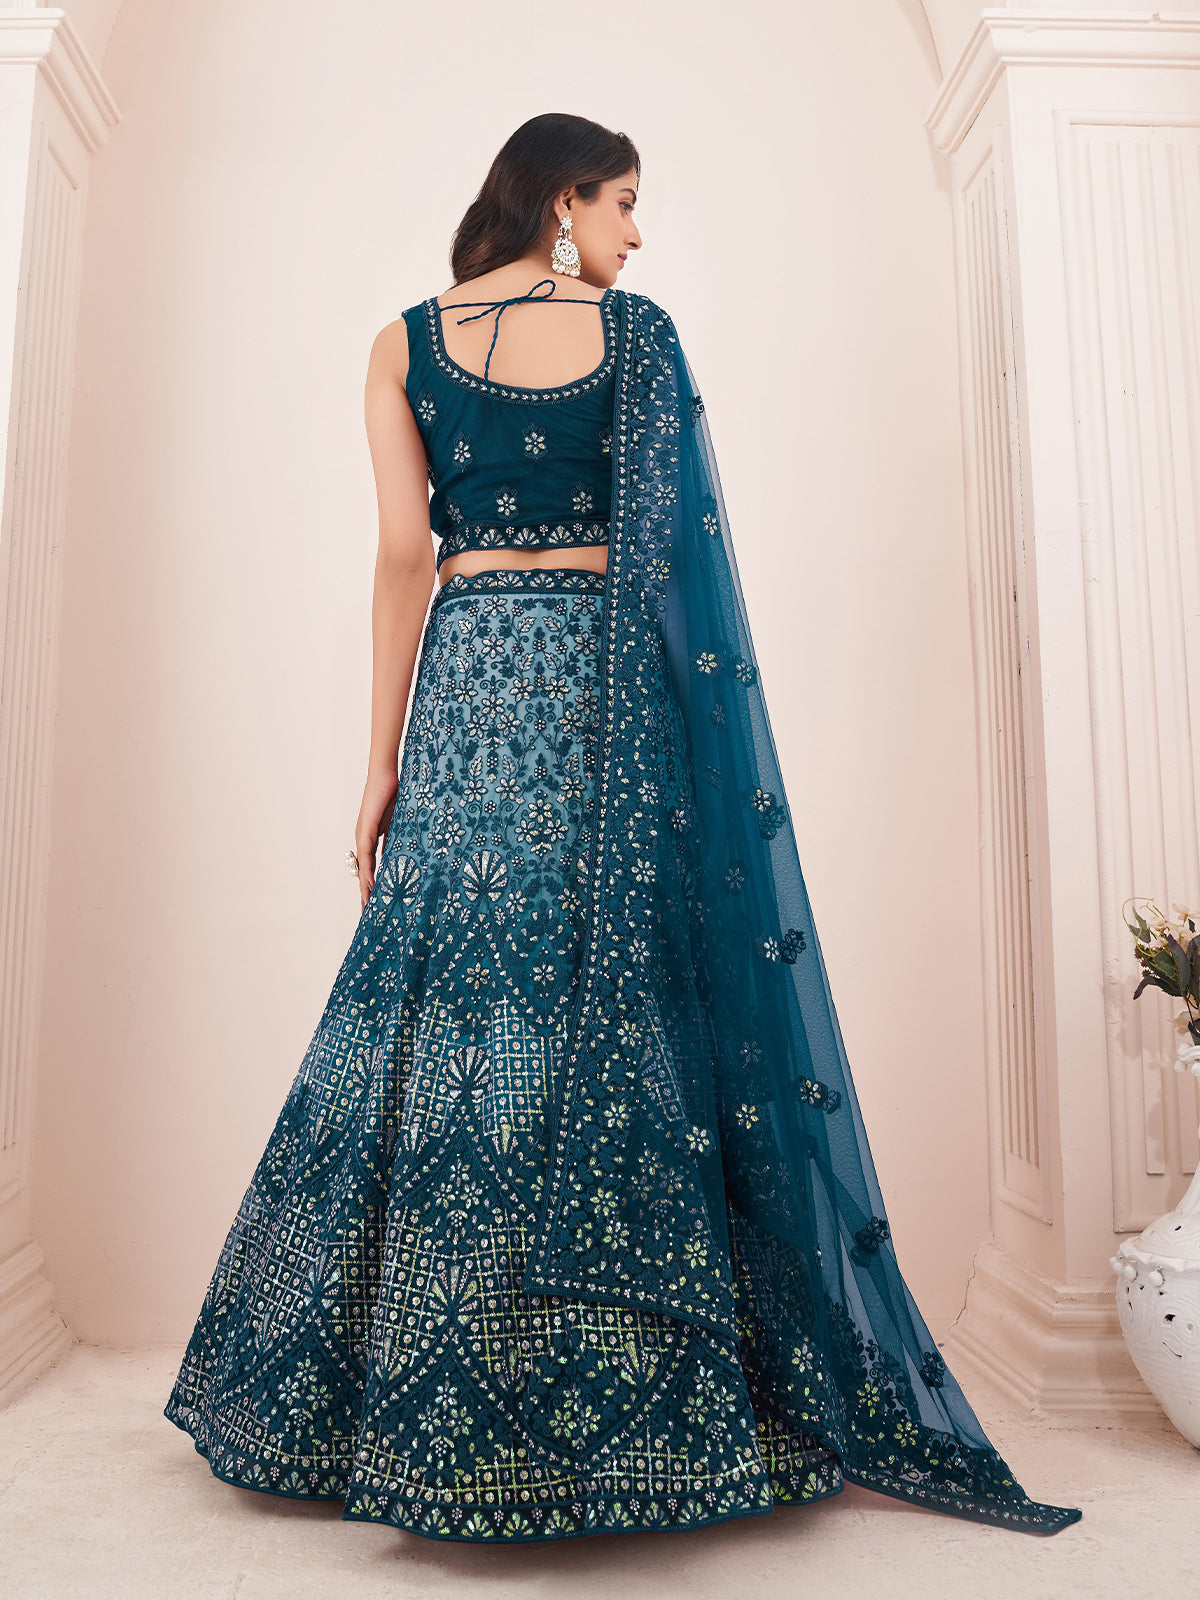 Odette Blue Net Embroidered Semi Stitched Lehenga With Unstitched Blouse for Women